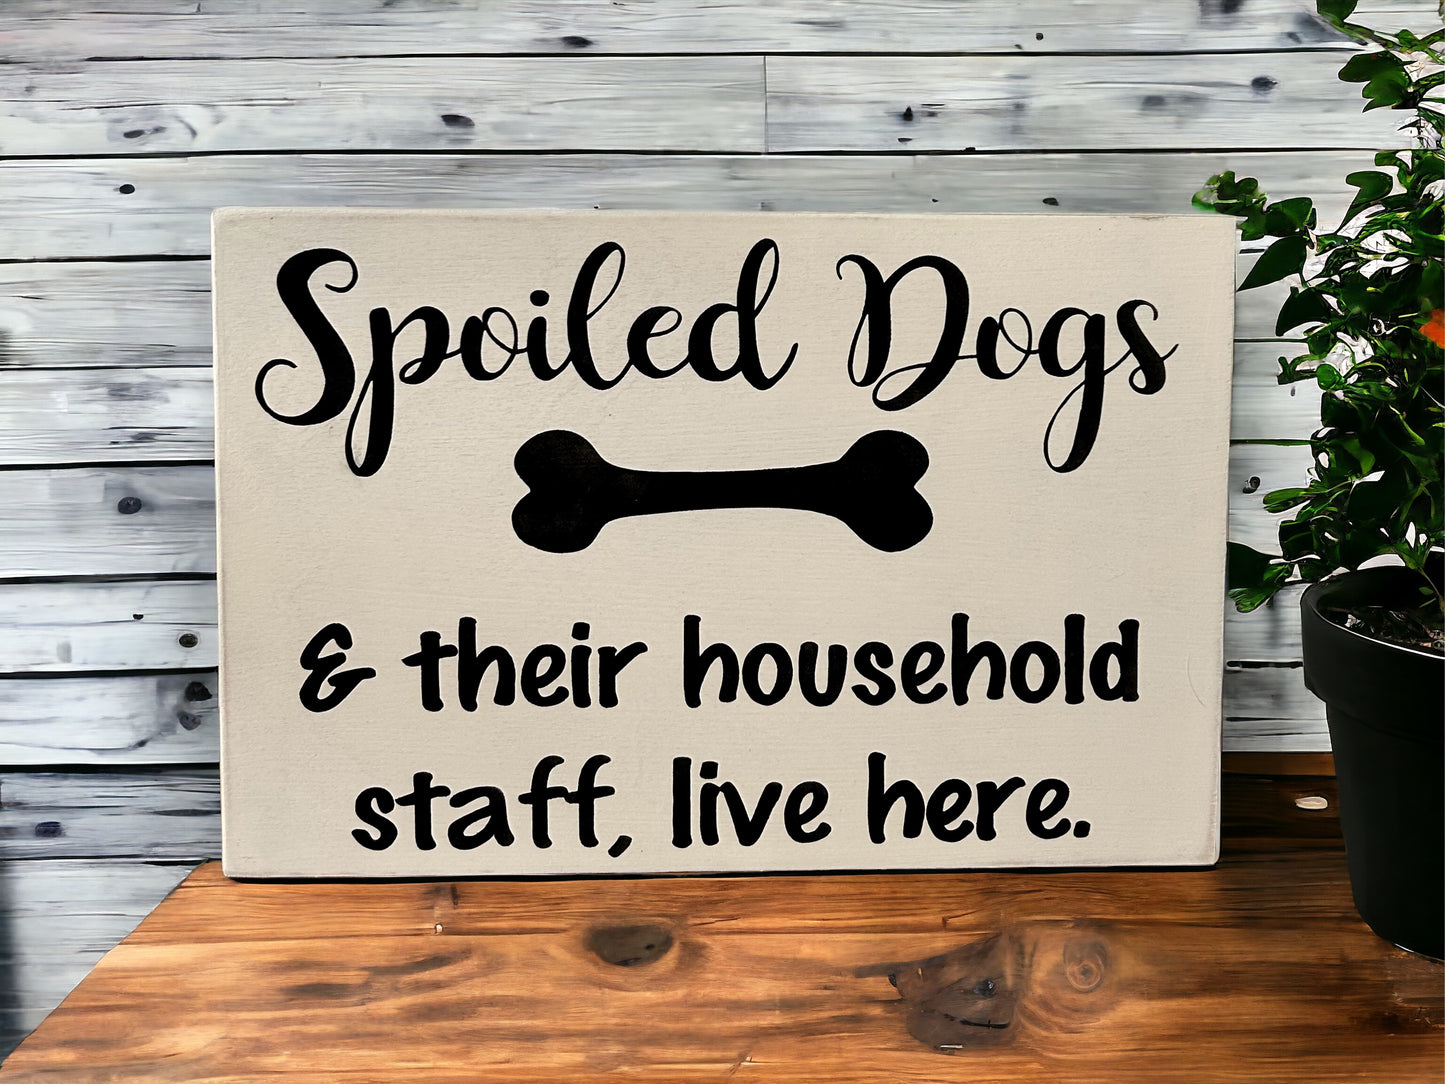 Spoiled Dogs - Funny Rustic Wood Sign